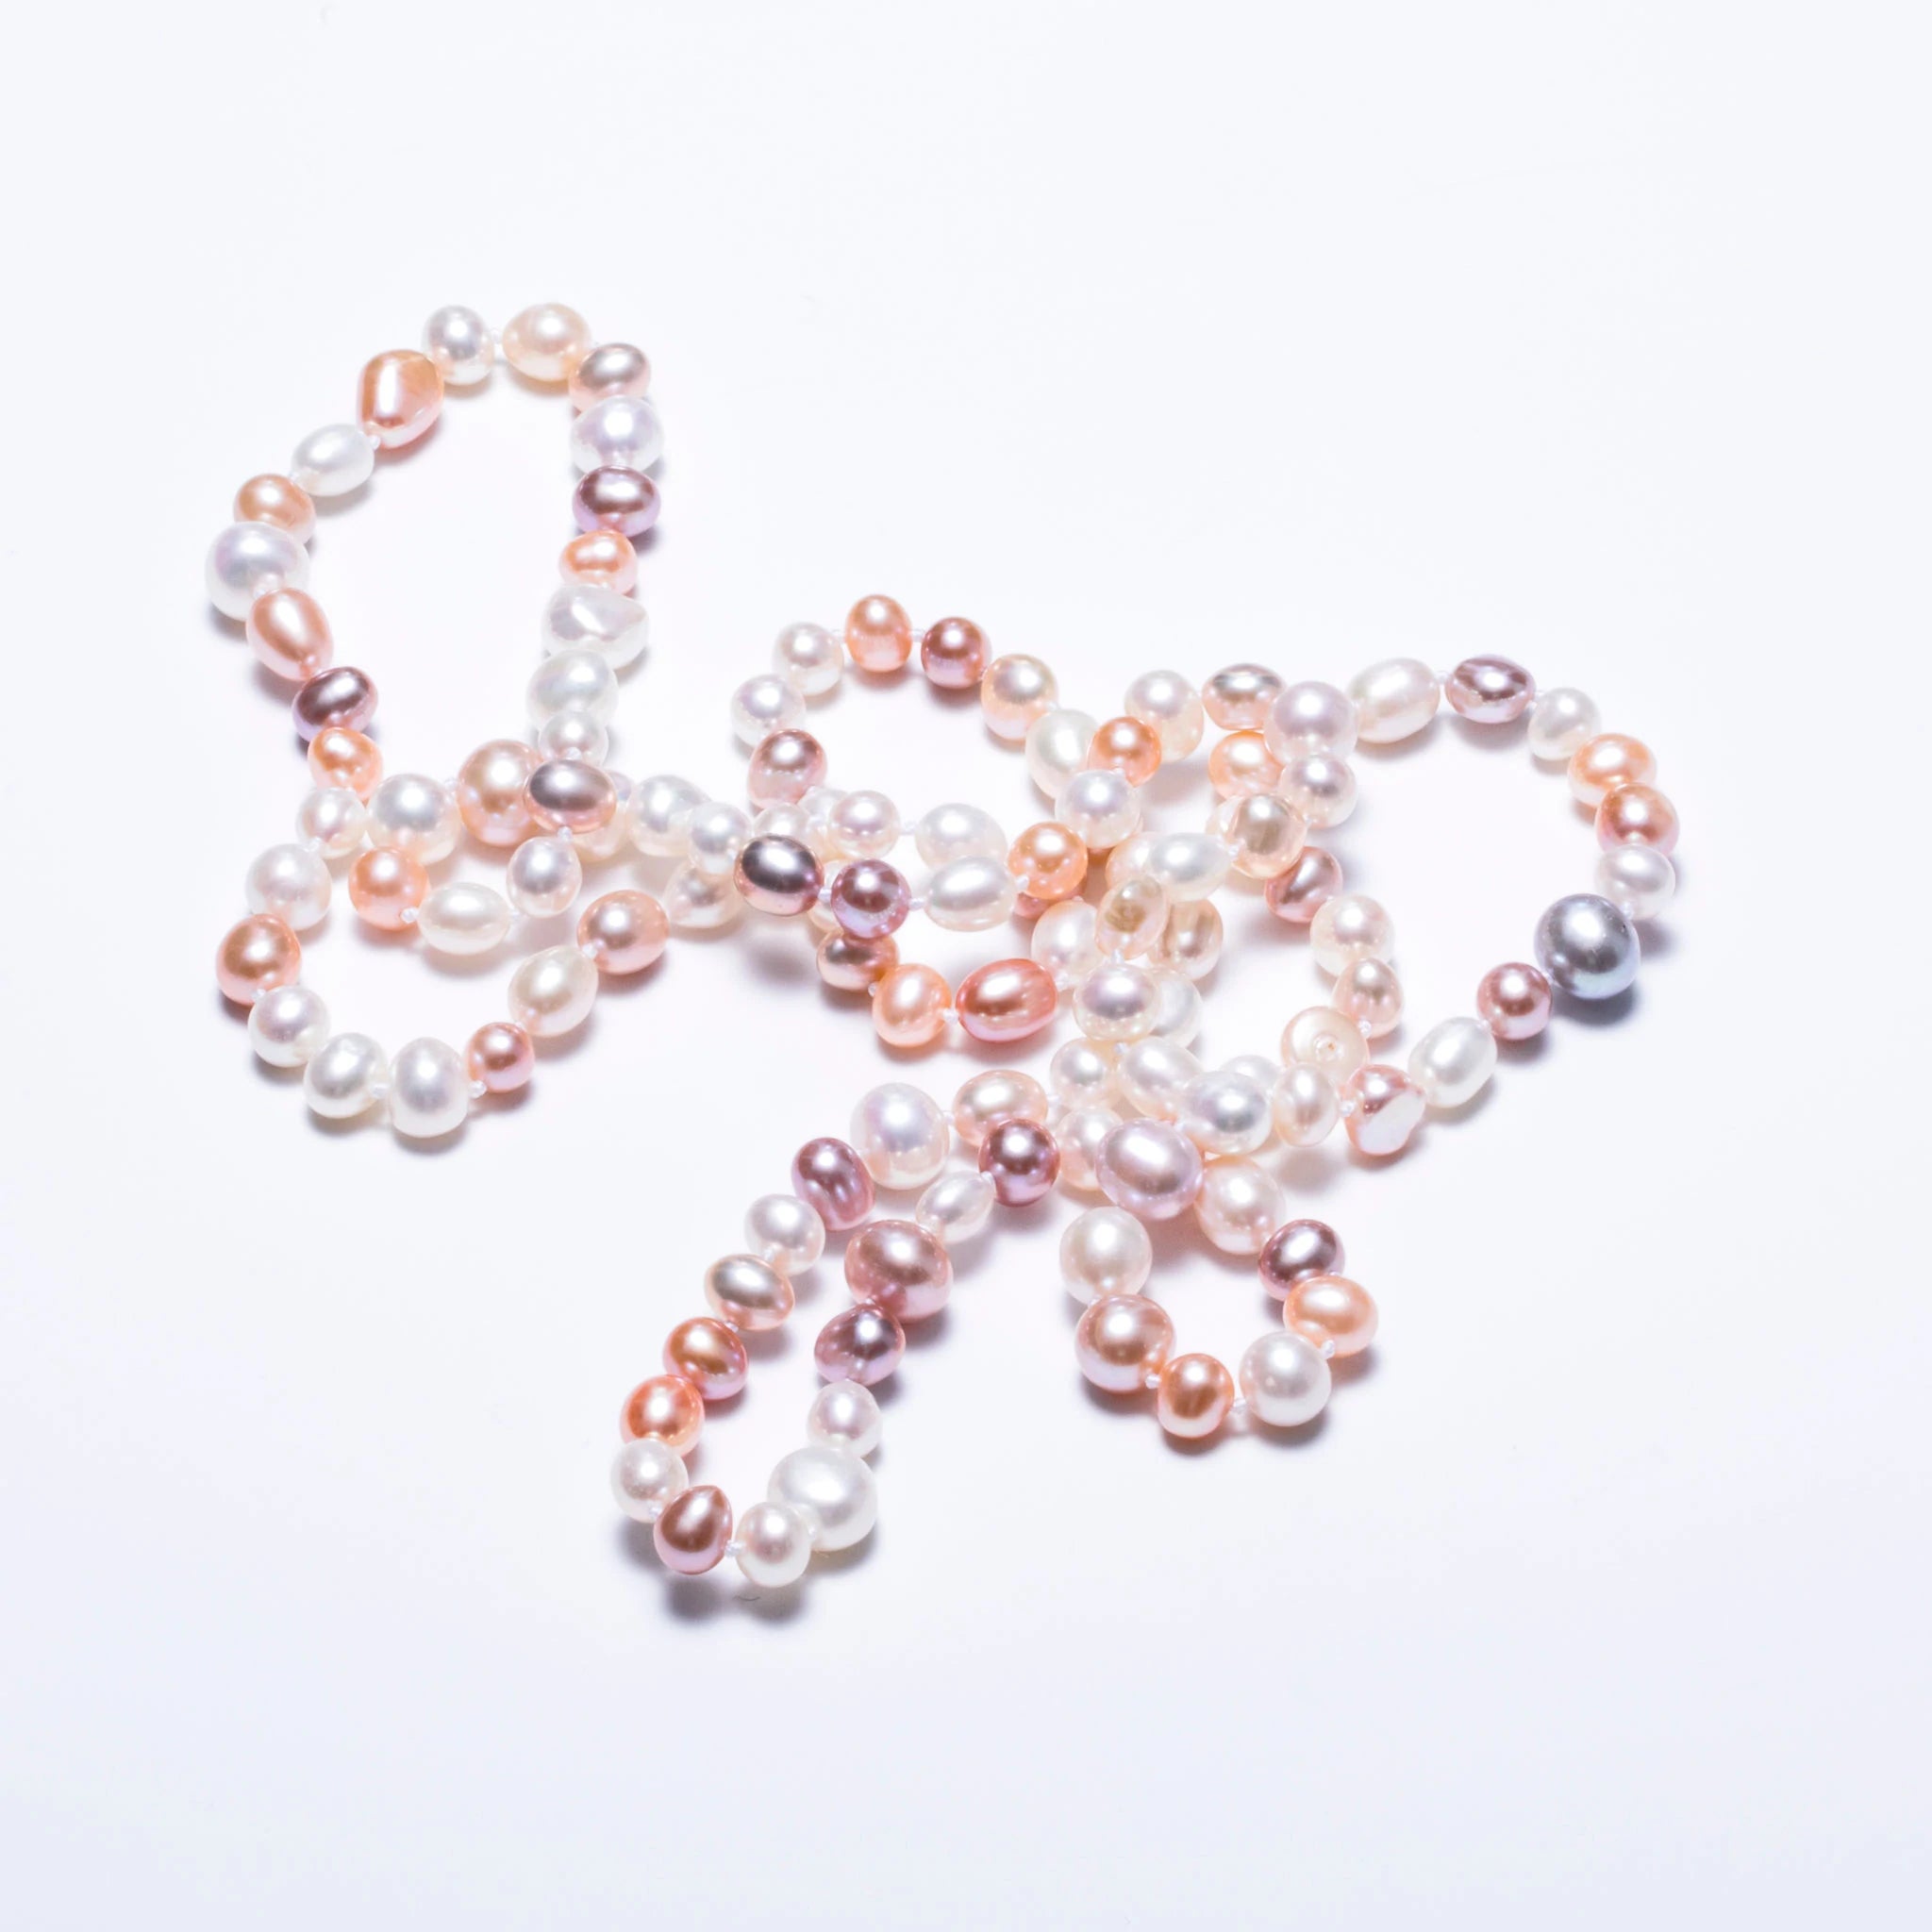 Multi-pink and white freshwater pearl necklace